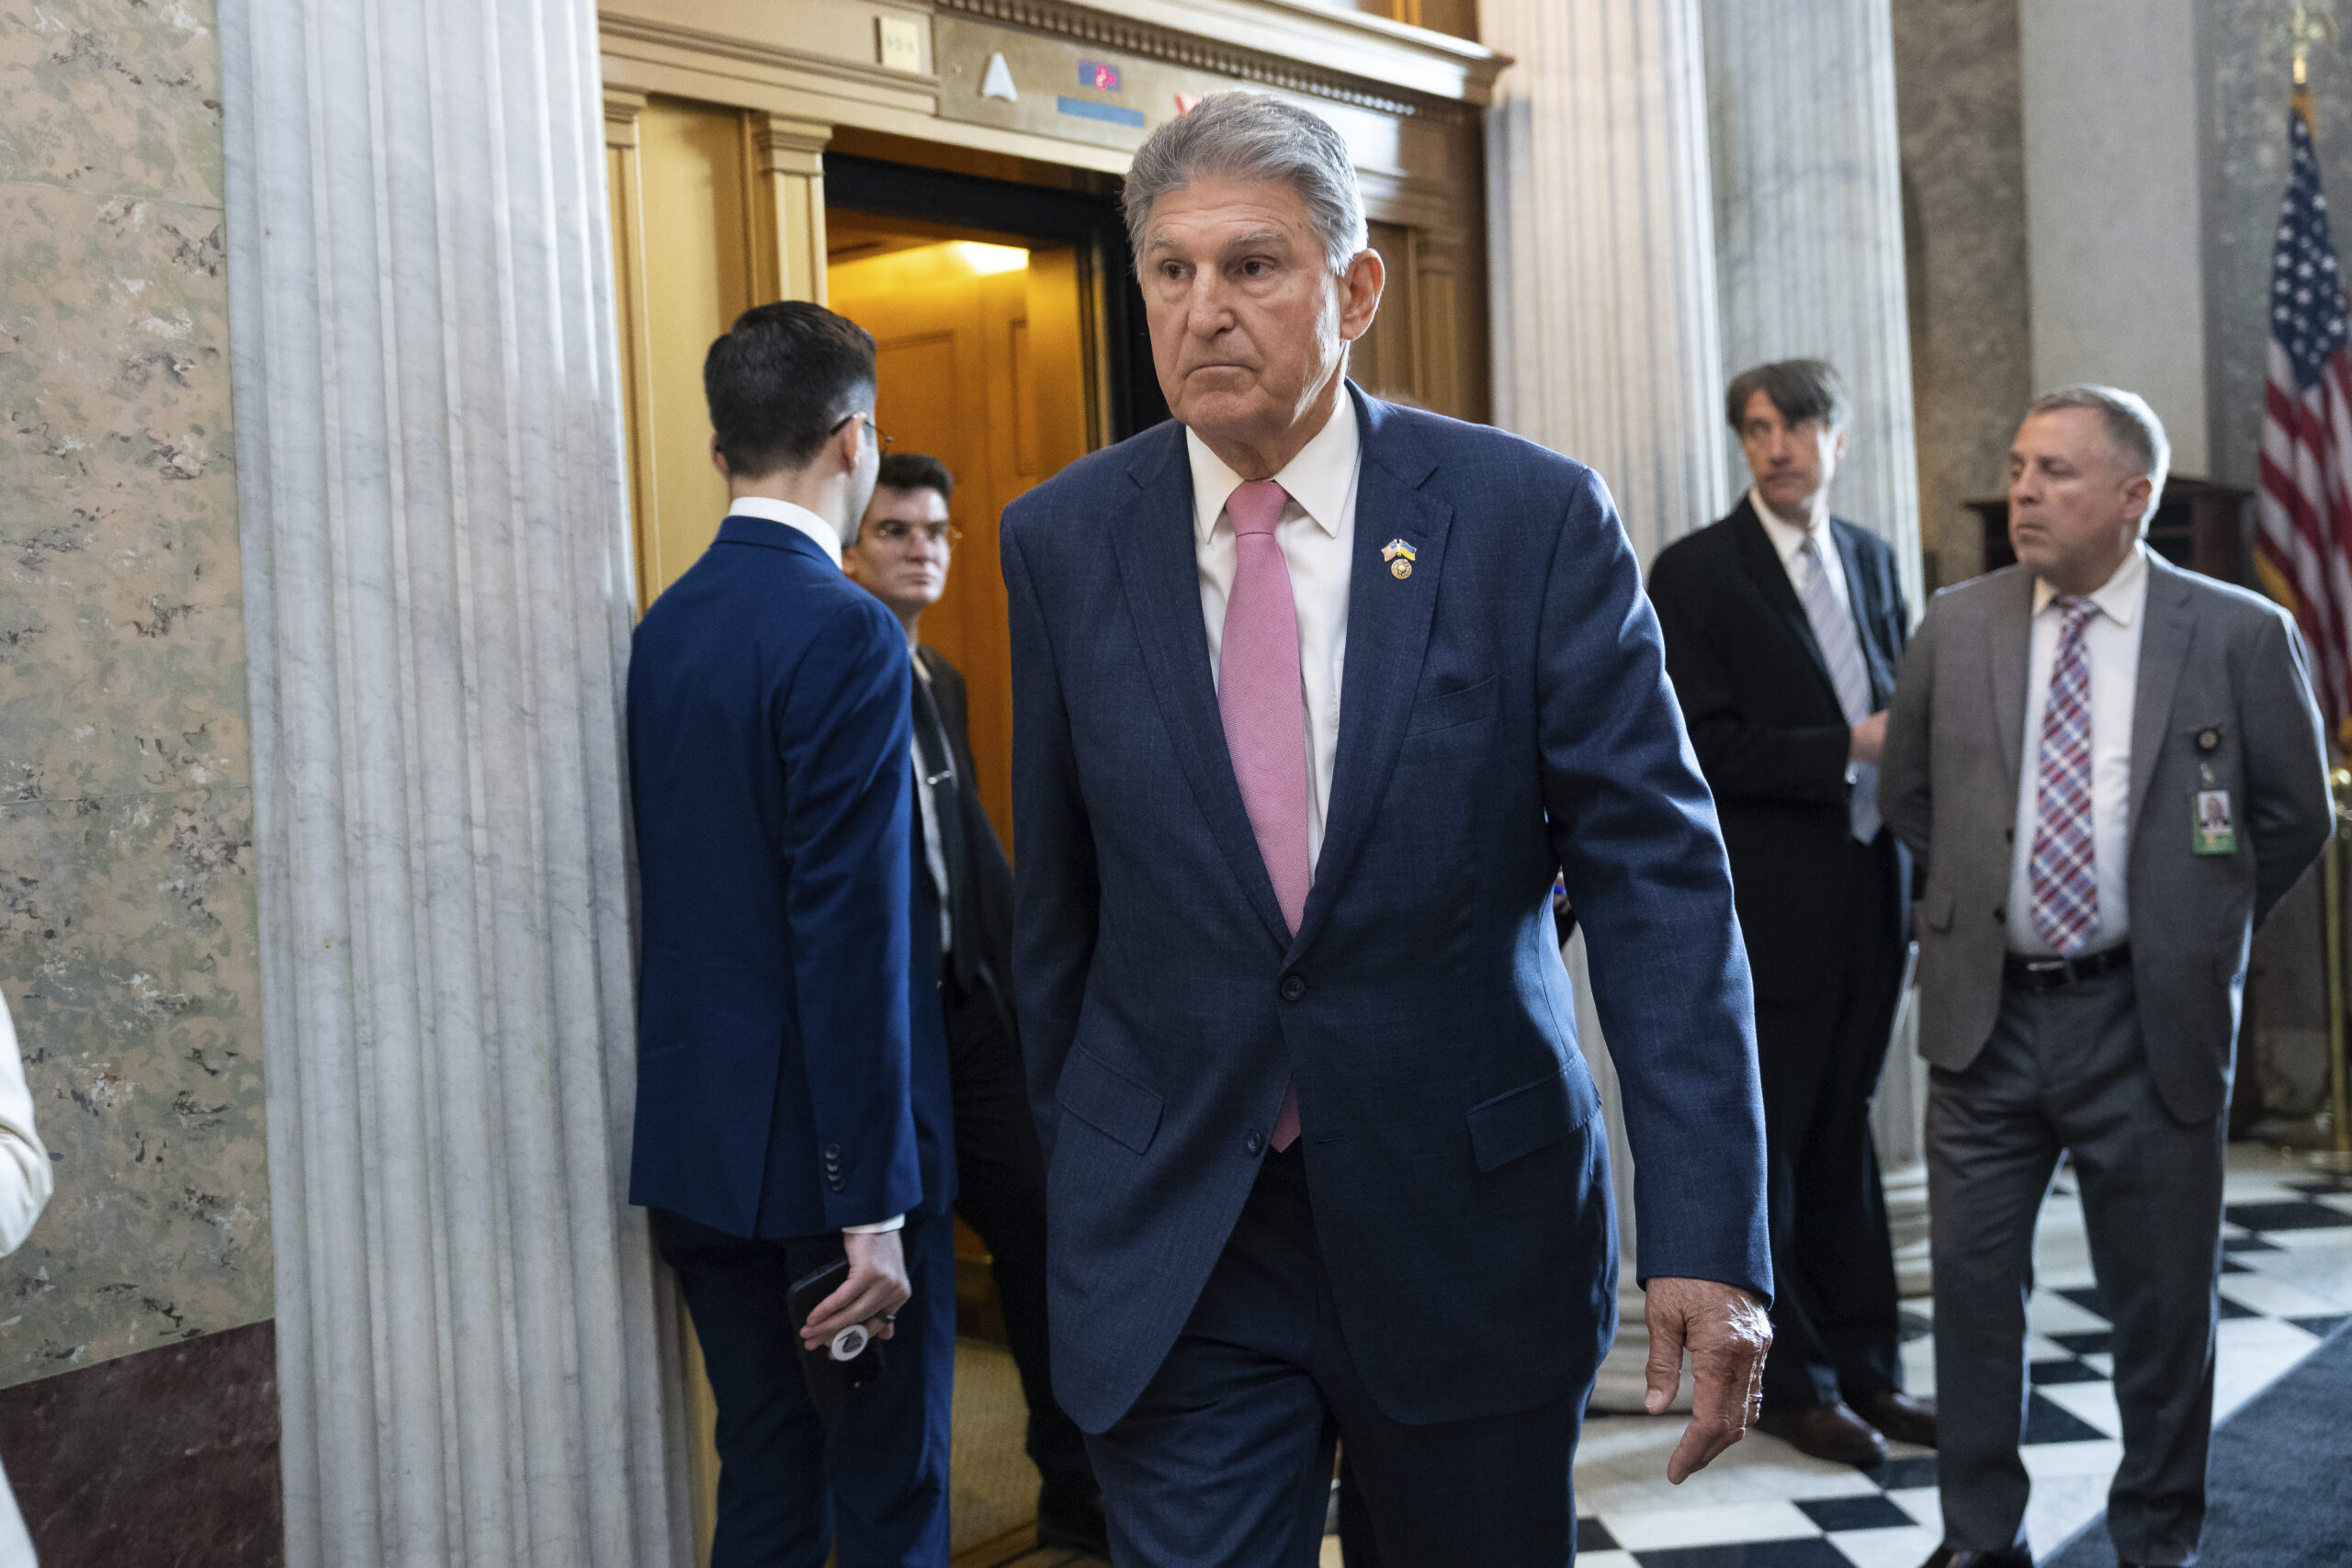 Manchin attacked EPA’s new rules. They could cost him millions.